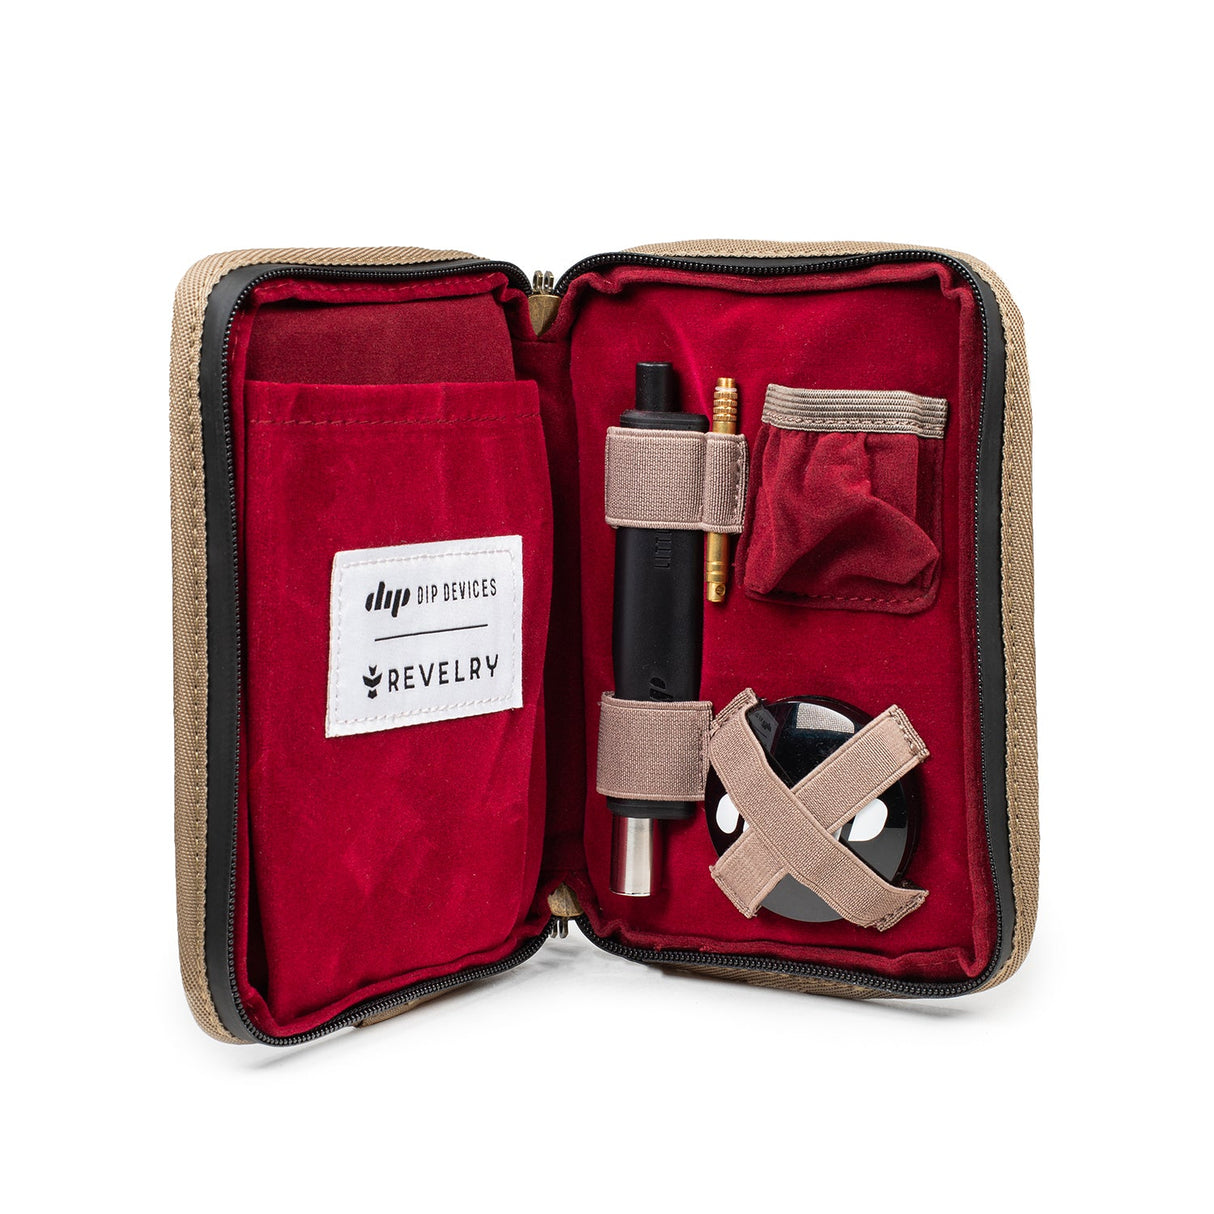 Revelry Supply - The Dab Kit Smell Proof Kit open view with tools and compartments